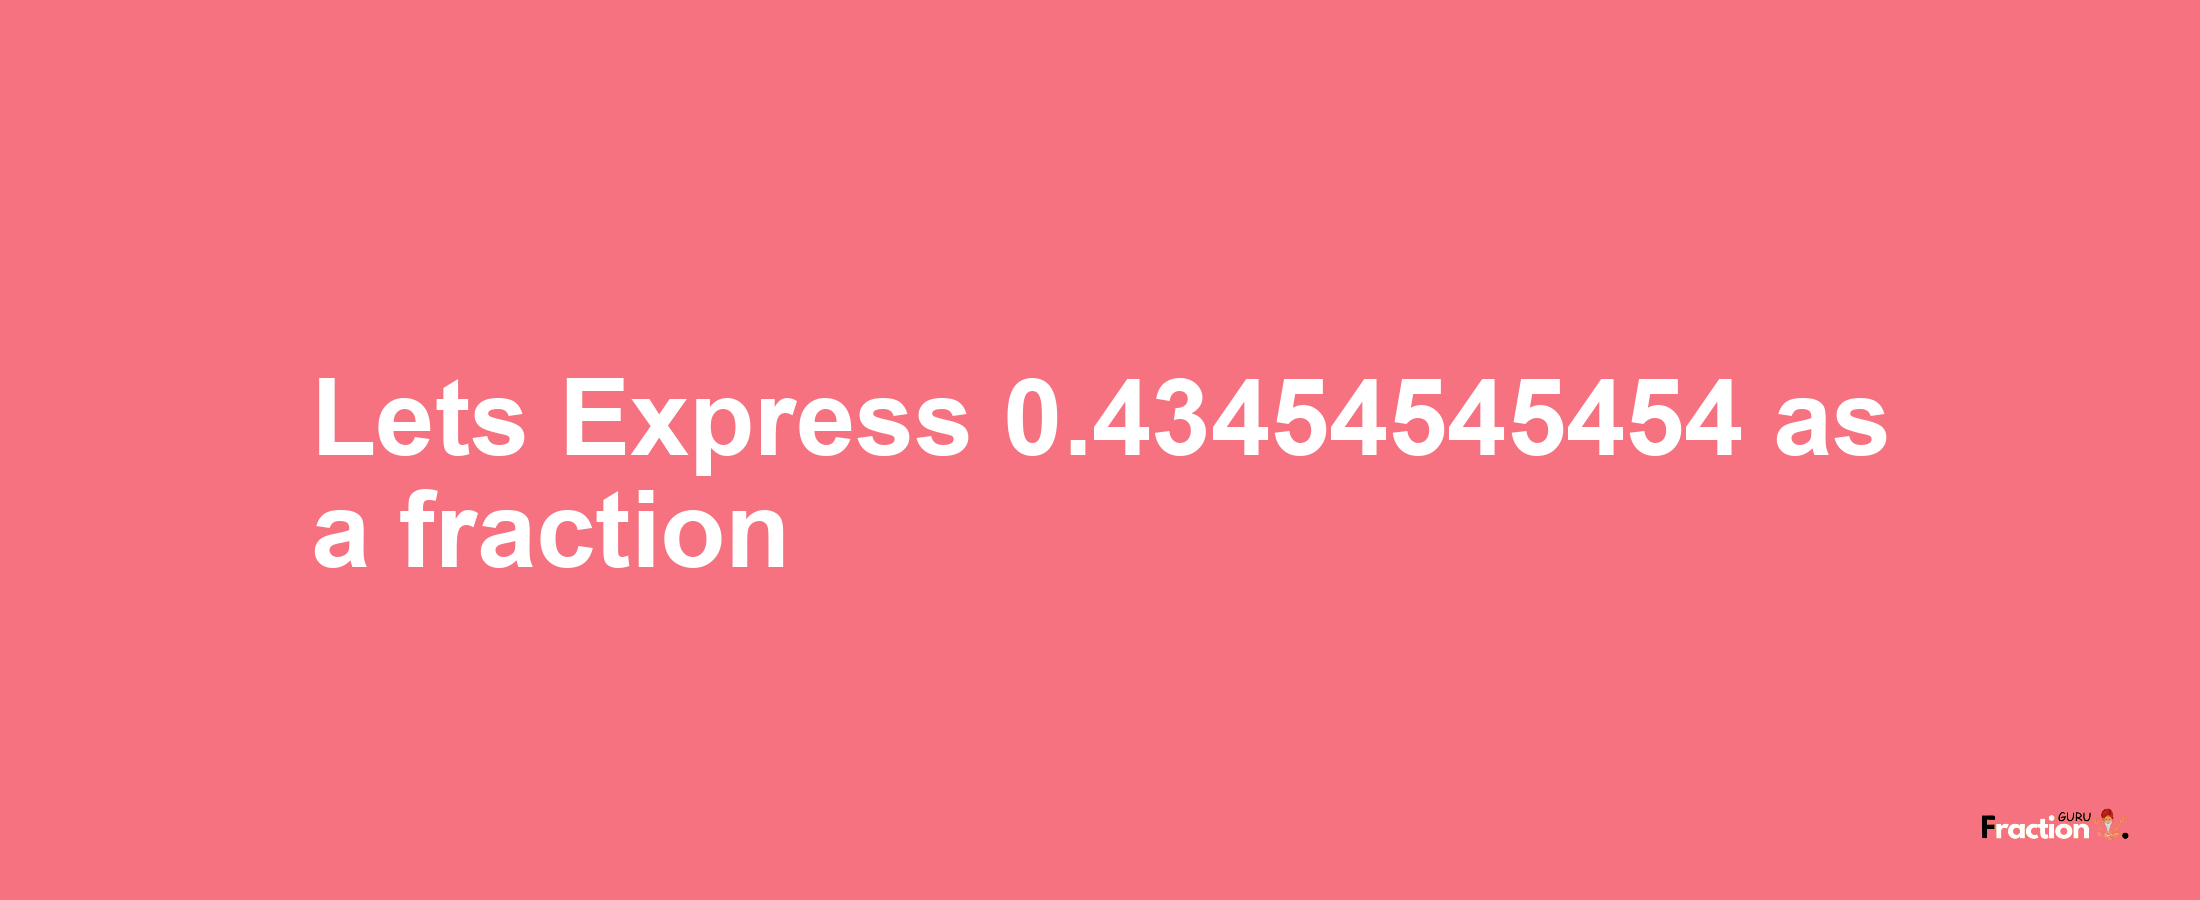 Lets Express 0.43454545454 as afraction